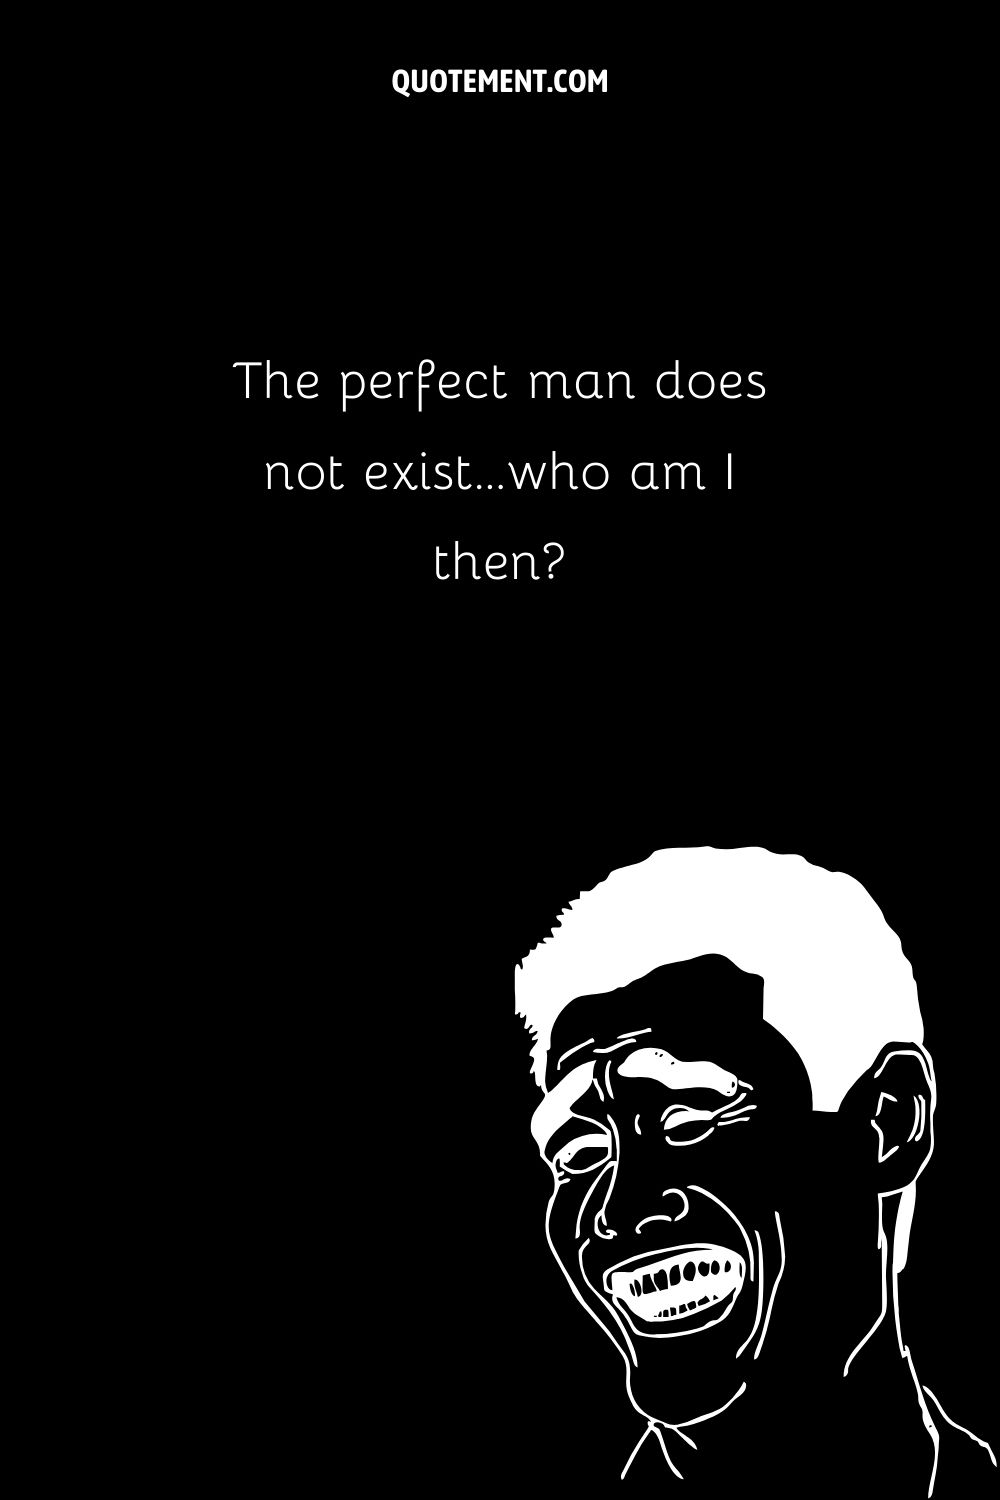 The perfect man does not exist…who am I then